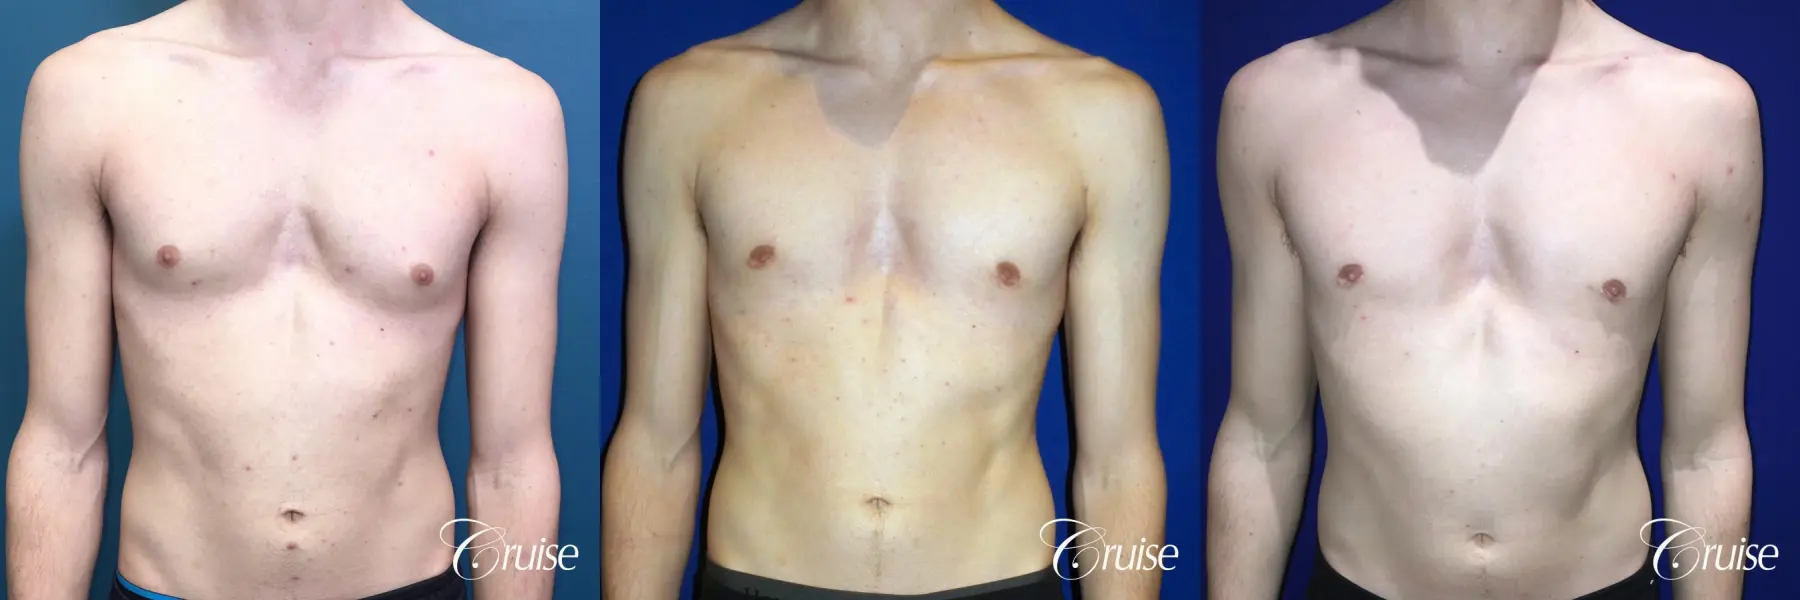 ALS - Body: Patient 1 - Before and After  